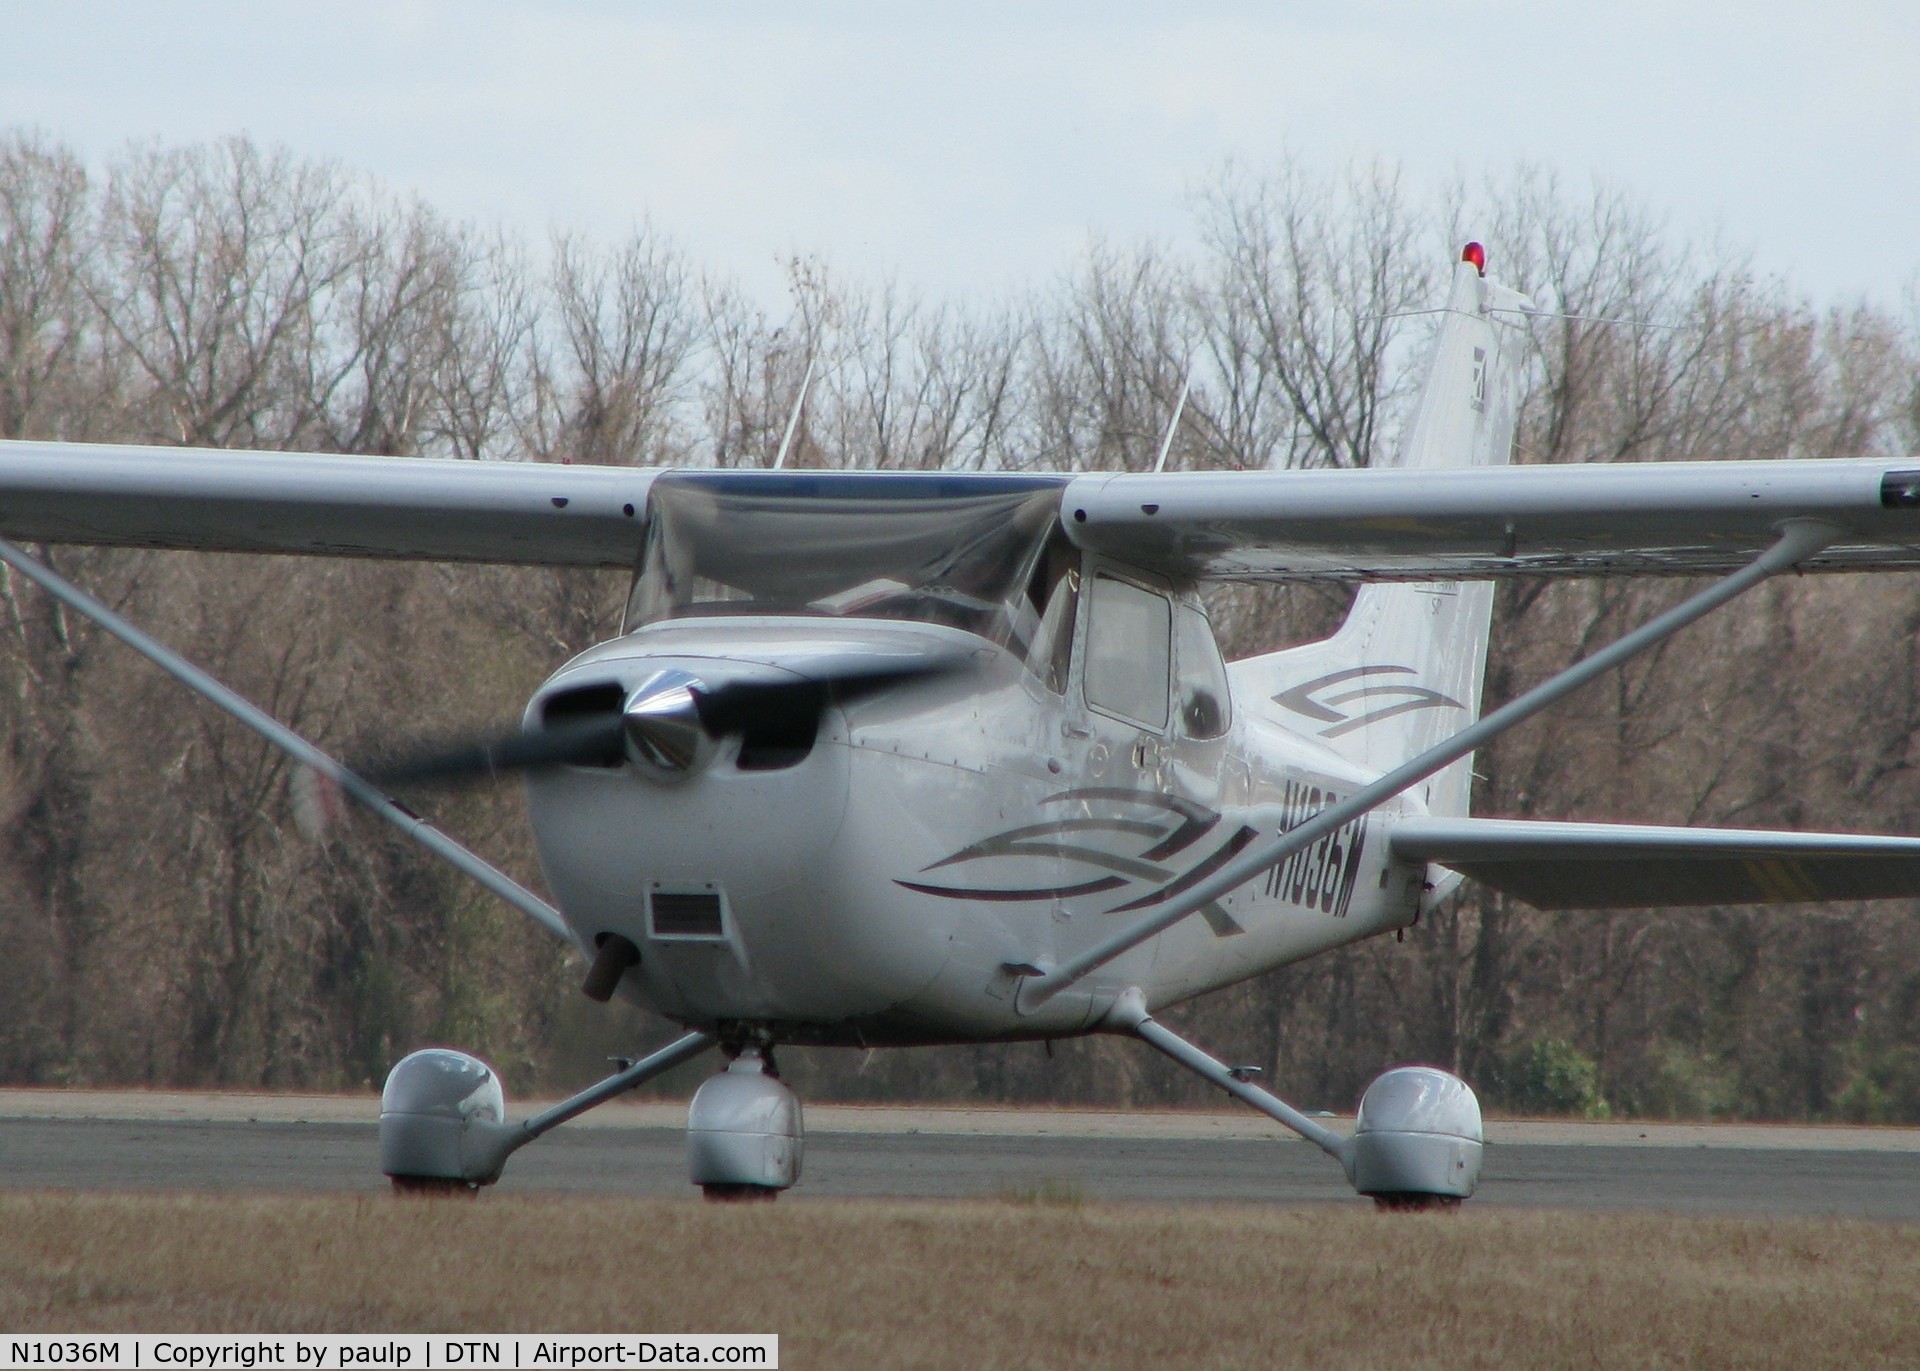 N1036M, 2007 Cessna 172S C/N 172S10599, Taxiing on Foxtrot to Runway 14 at the Downtown Shreveport airport.